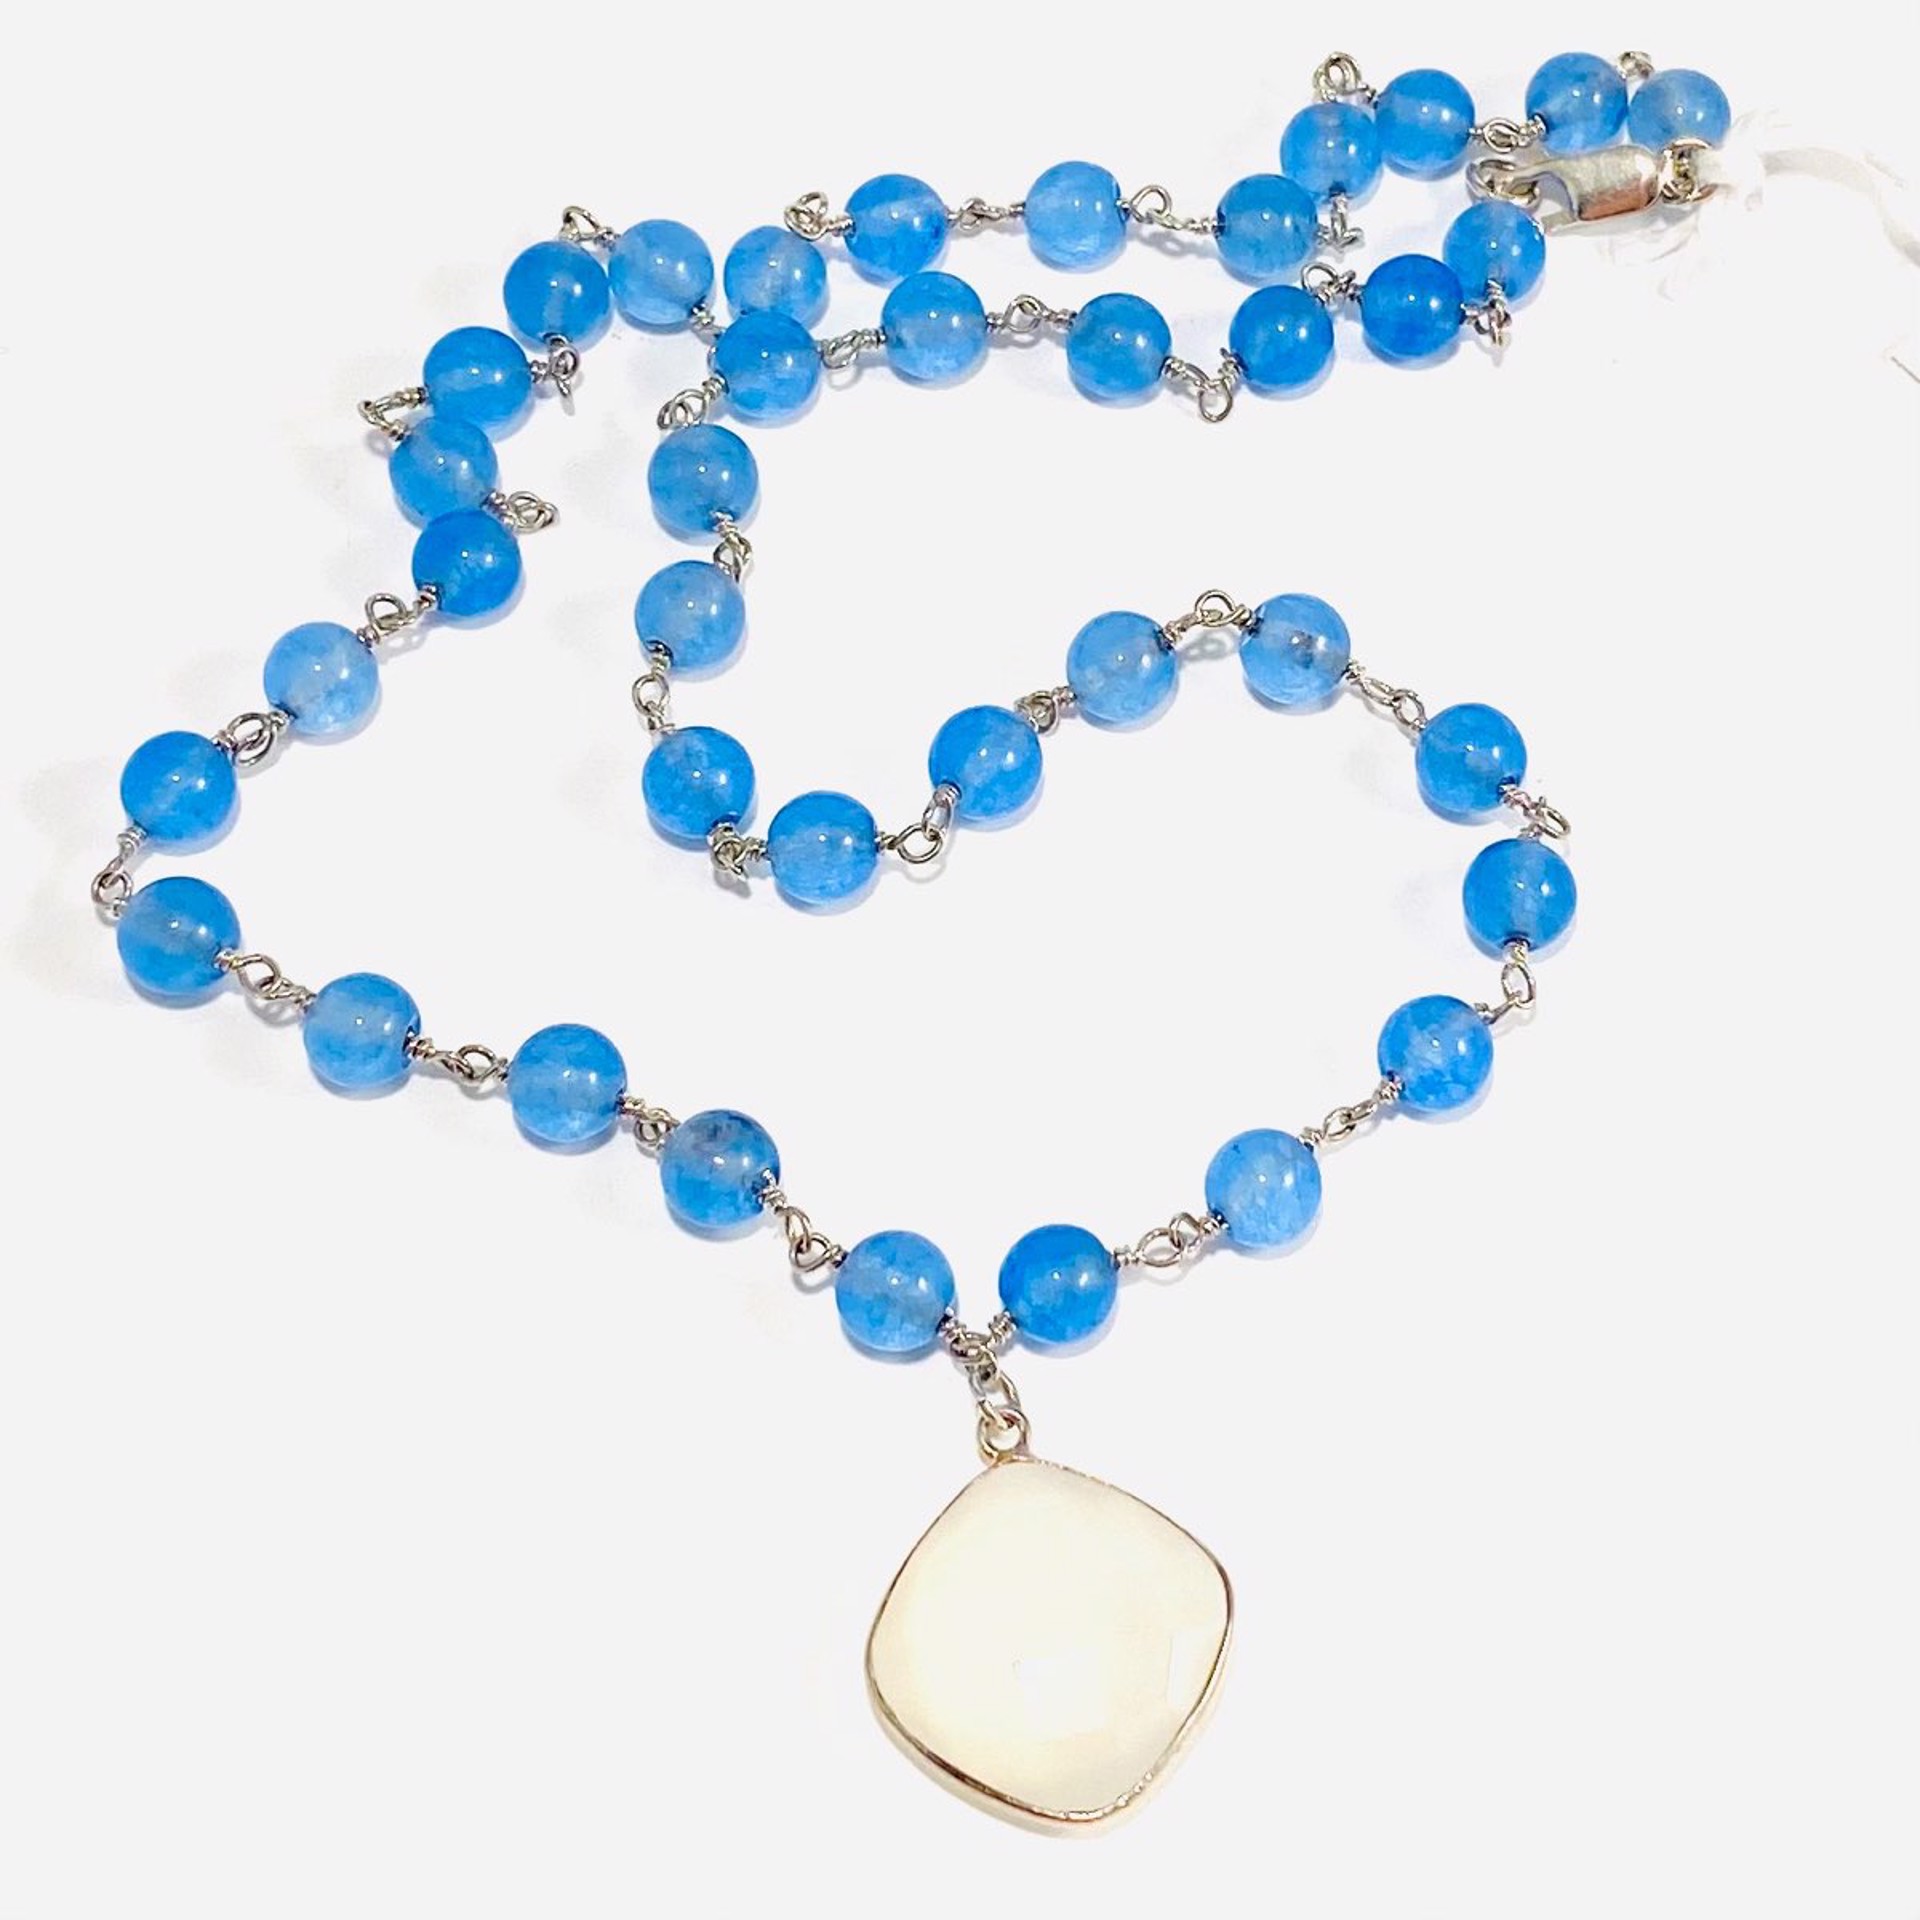 NT22-148 Round Blue Jade Chain Faceted White Chalcedony Necklace by Nance Trueworthy